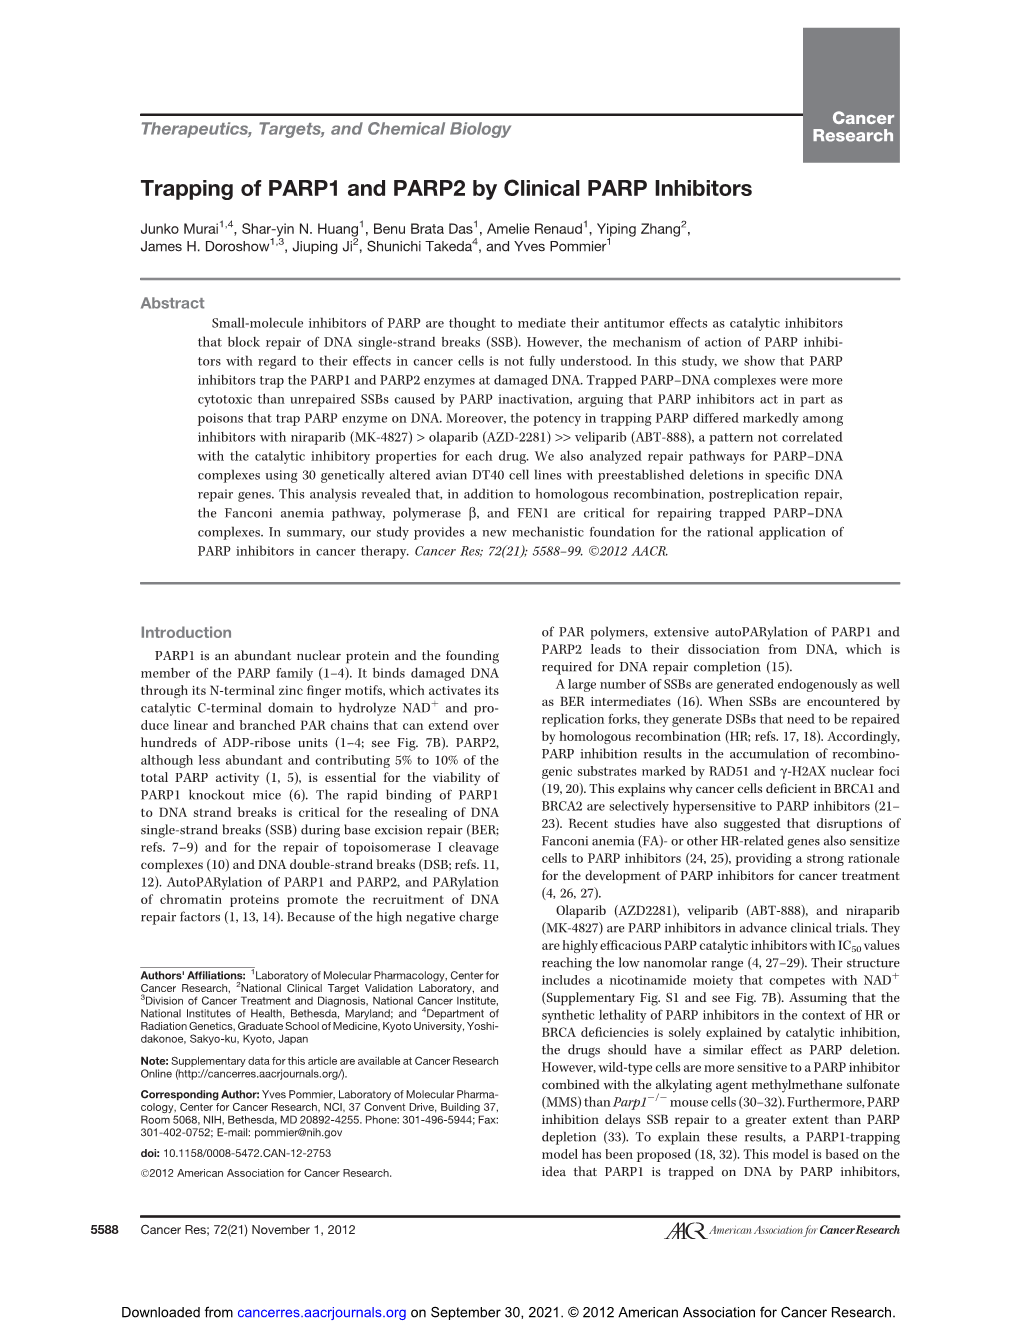 Trapping of PARP1 and PARP2 by Clinical PARP Inhibitors. Cancer